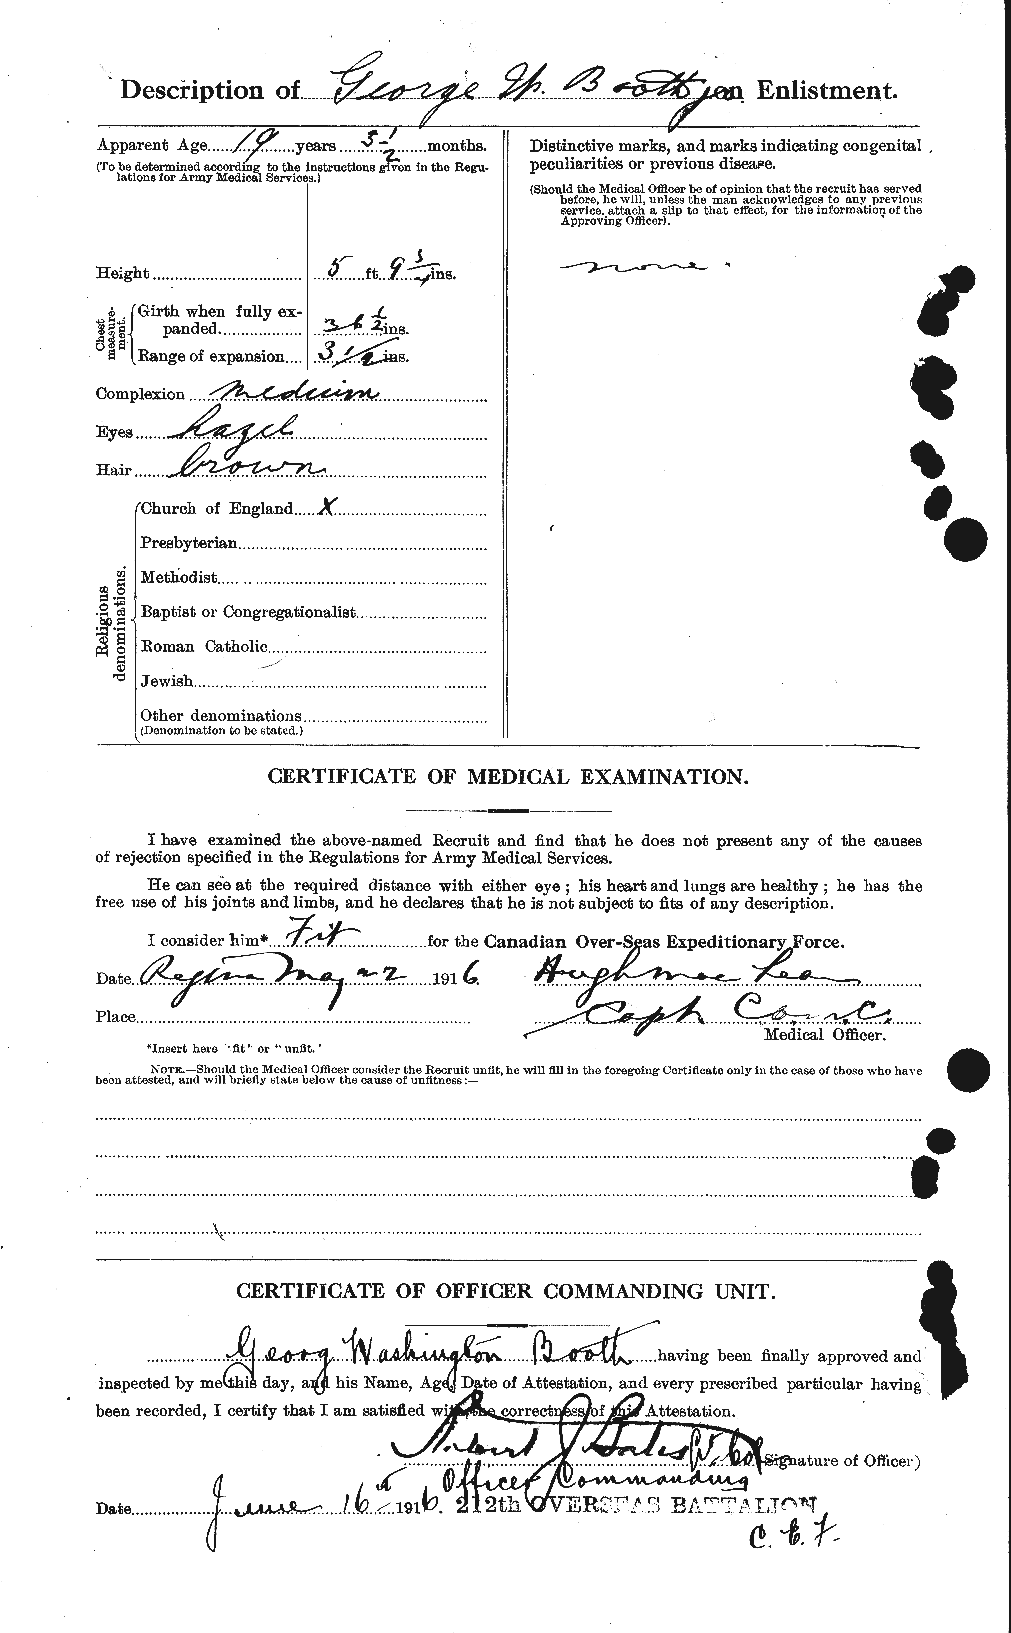 Personnel Records of the First World War - CEF 200232b